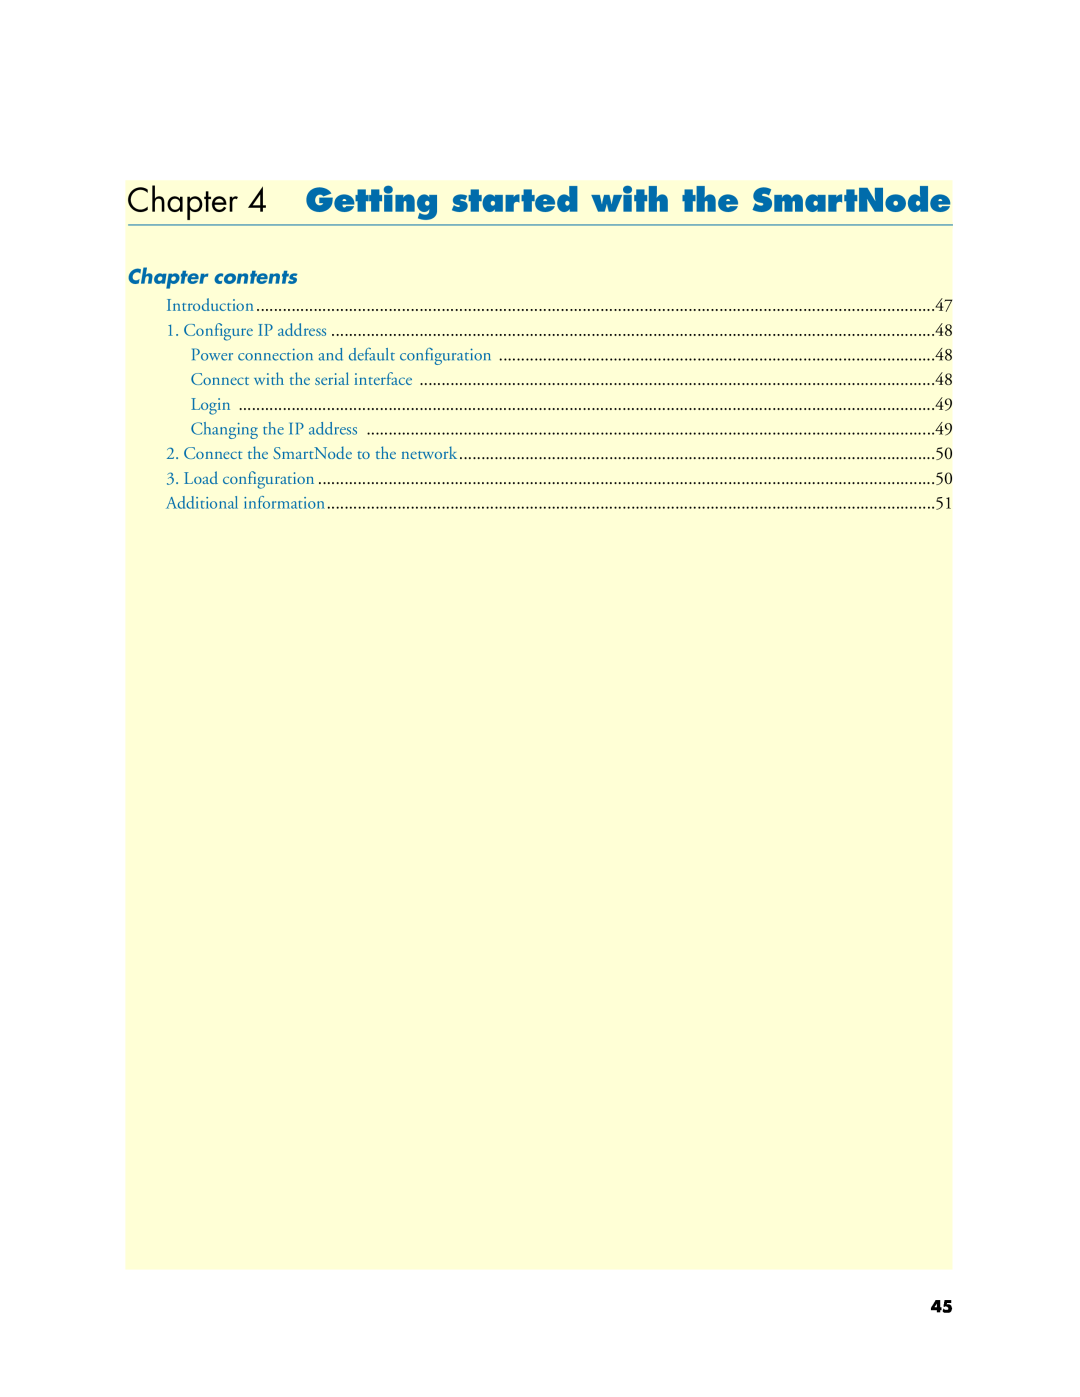 Patton electronic 4520 manual Getting started with the SmartNode, Chapter contents 